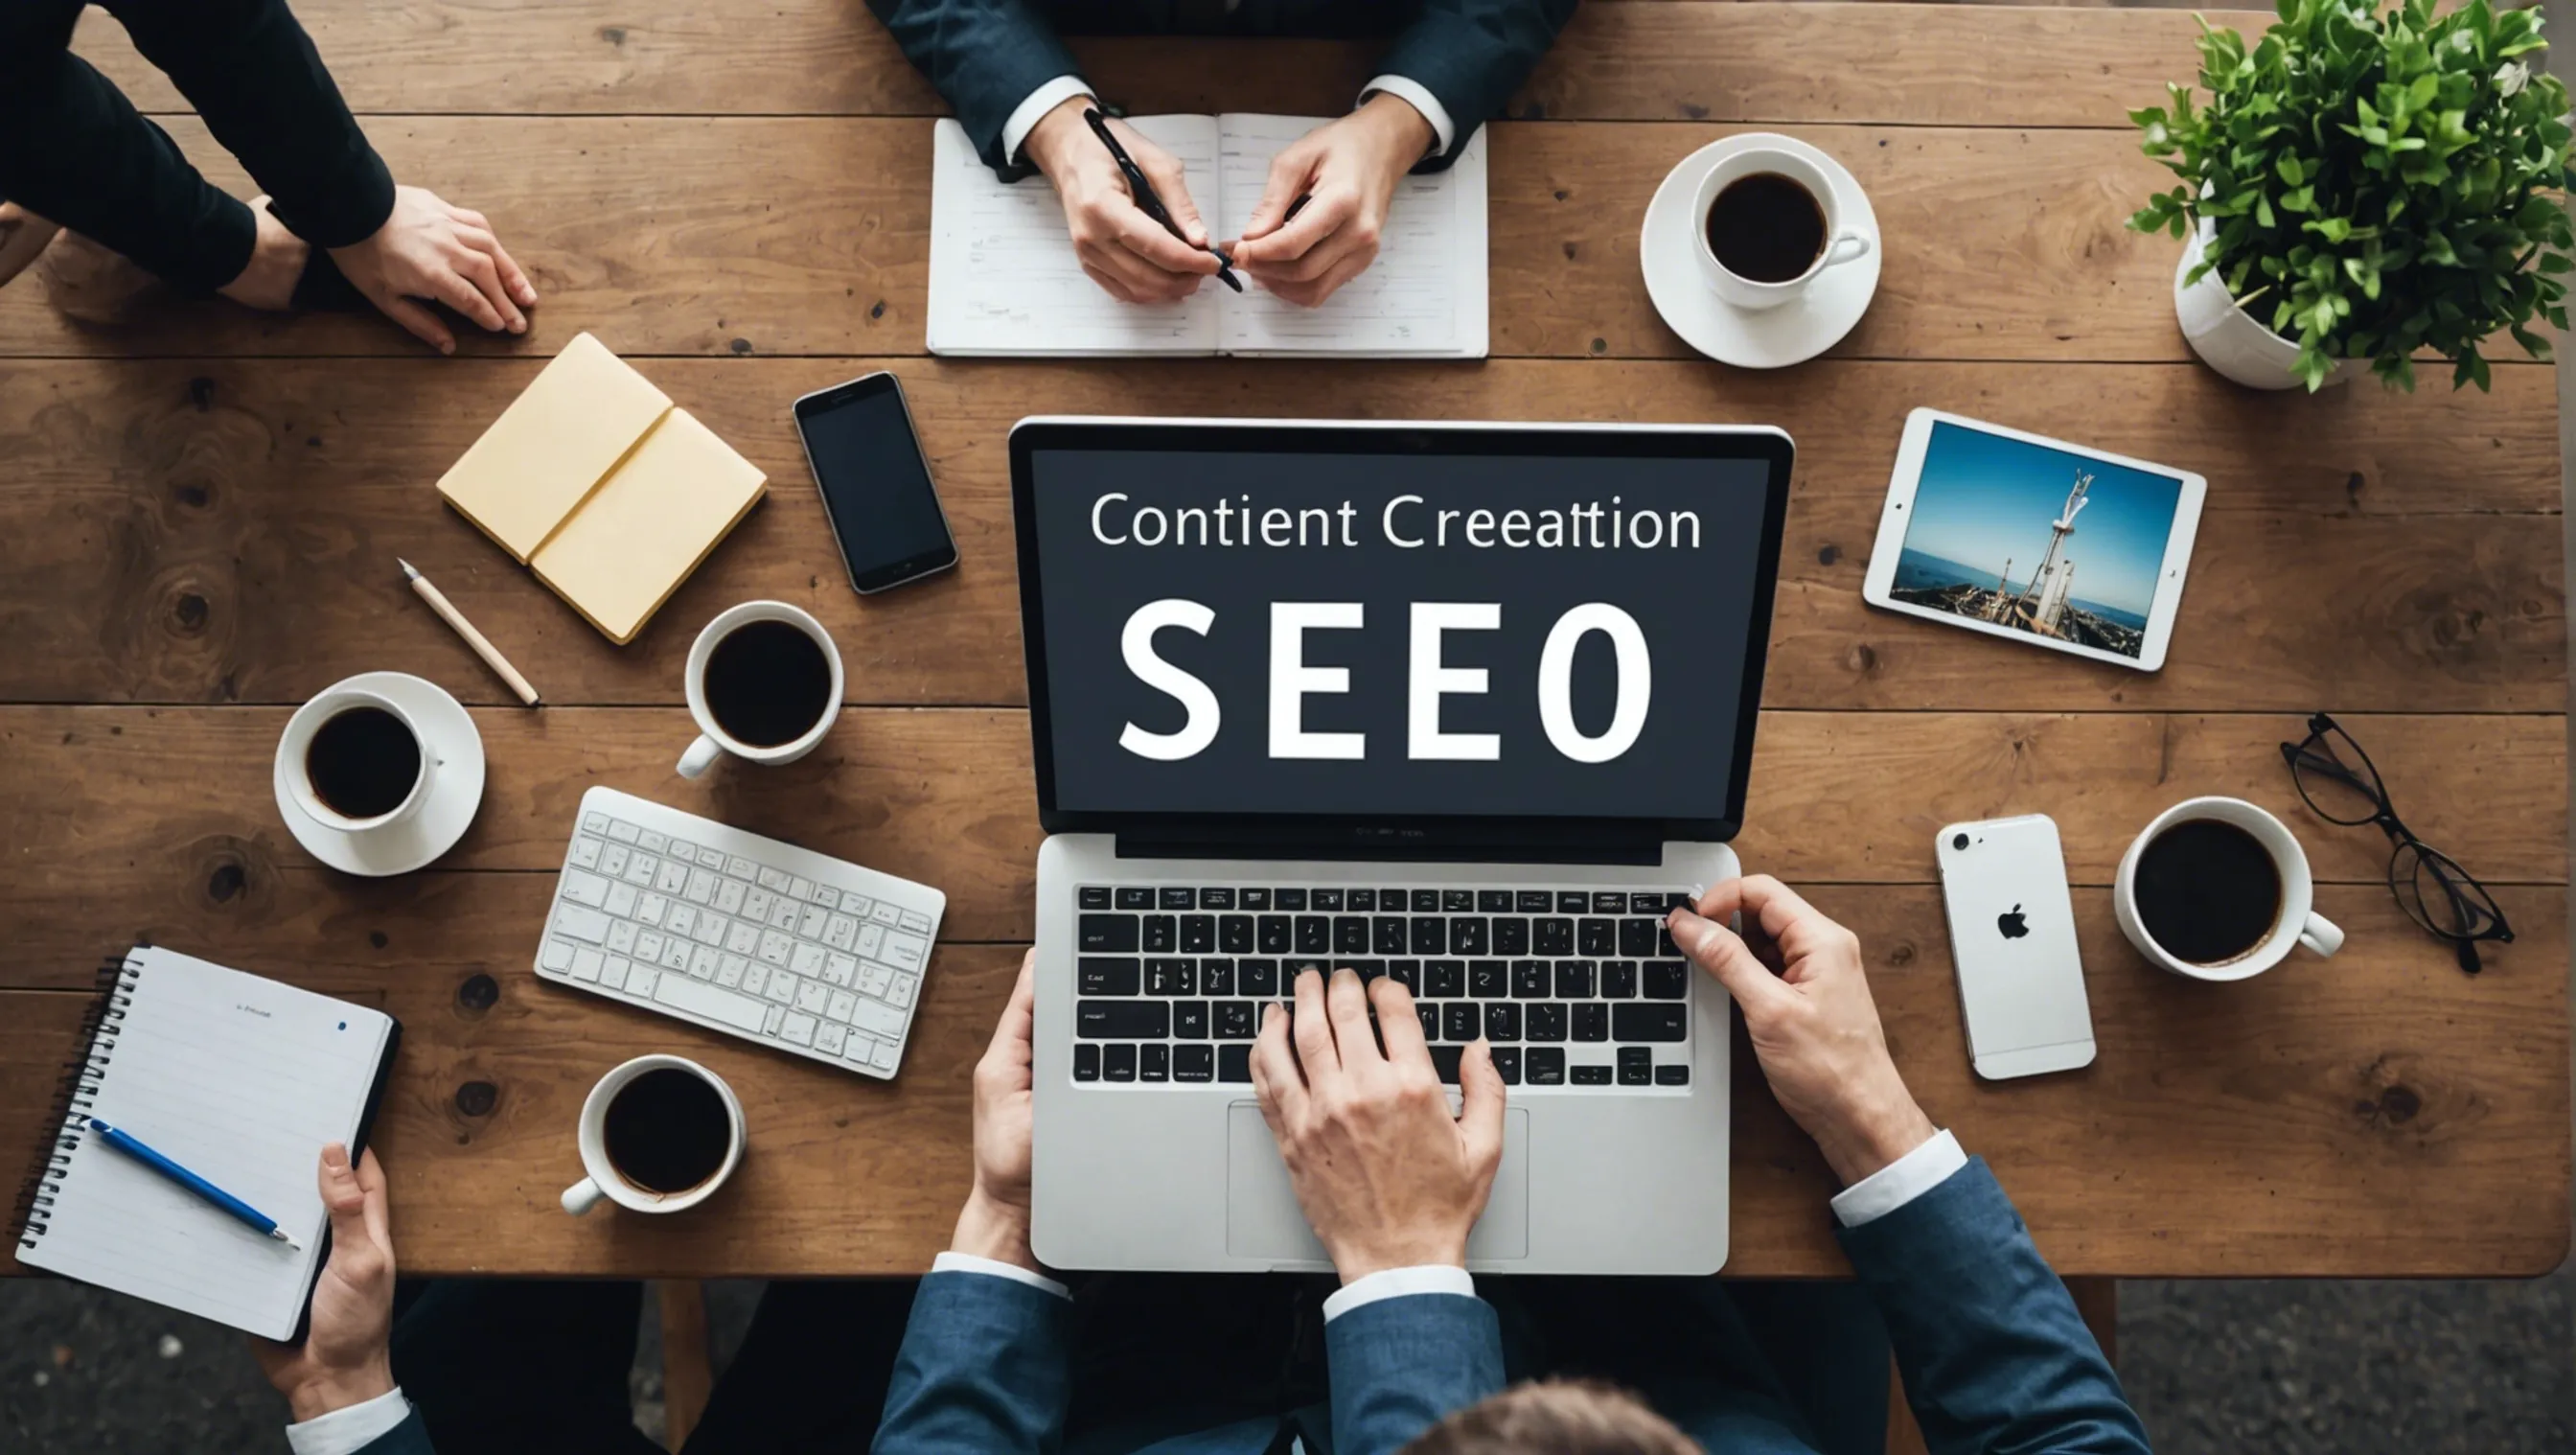 Content creation for seo